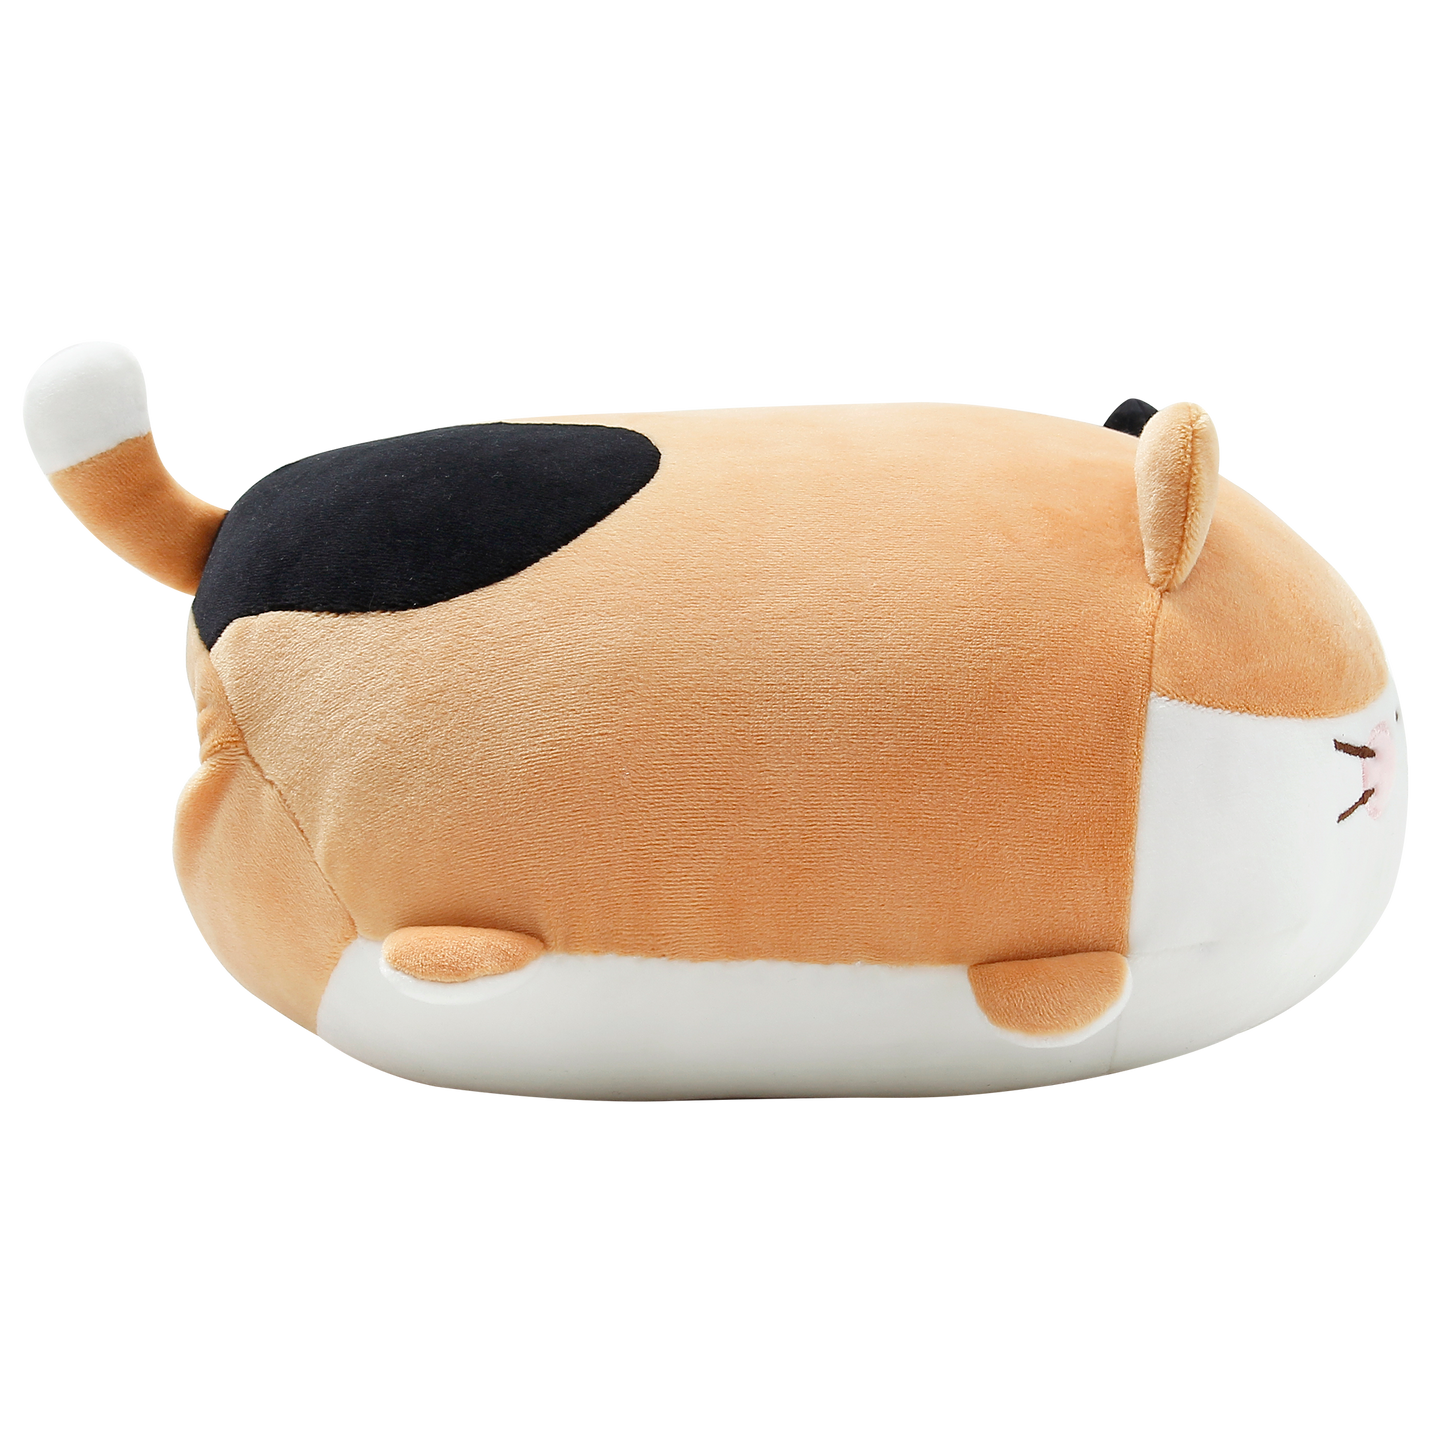 Side view of calico cat cushion.